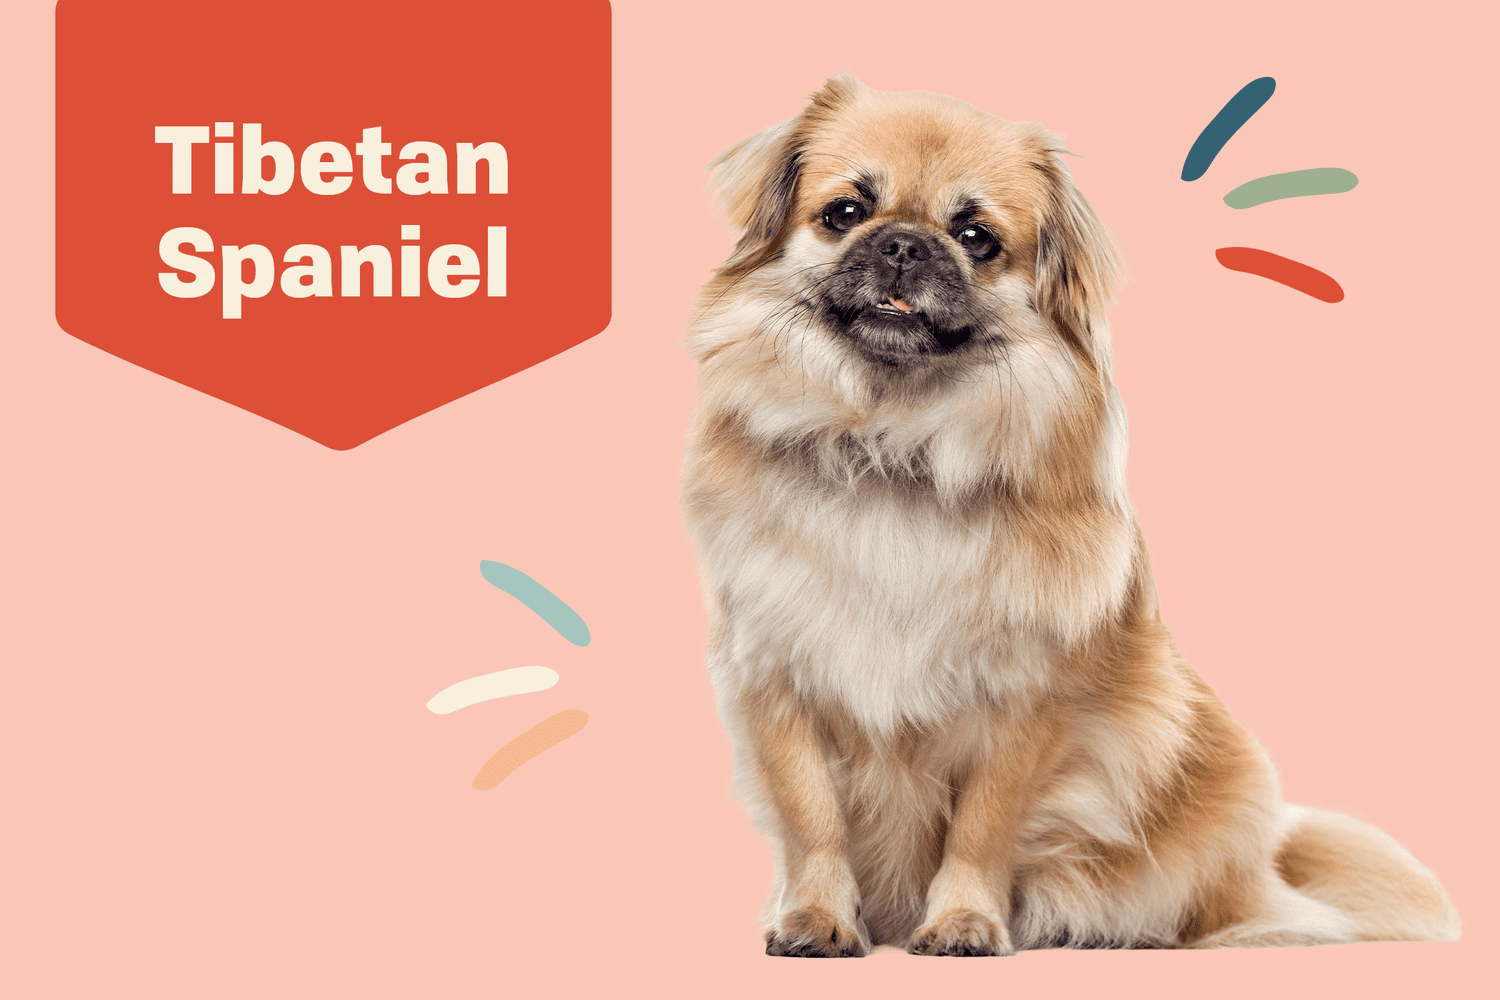 Tibetan Spaniel Dog Breed Information and Characteristics | Daily Paws